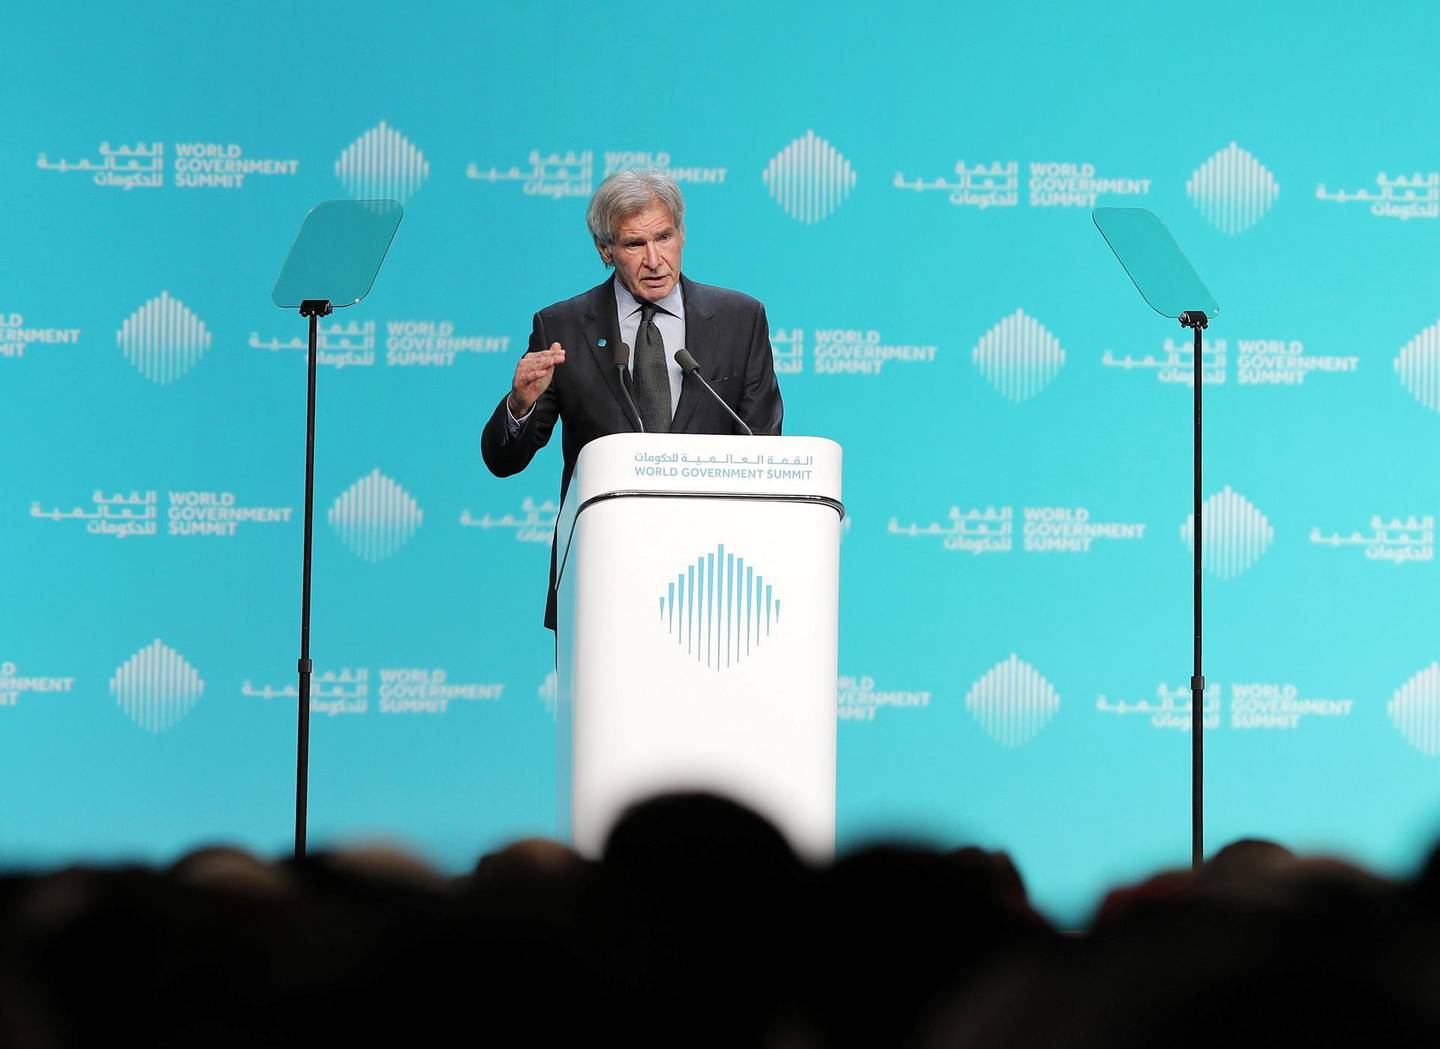 Dubai, United Arab Emirates - February 12, 2019: Harrison Ford speaks during day 2 at the World Government Summit. Tuesday the 12th of February 2019 at Madinat, Dubai. Chris Whiteoak / The National